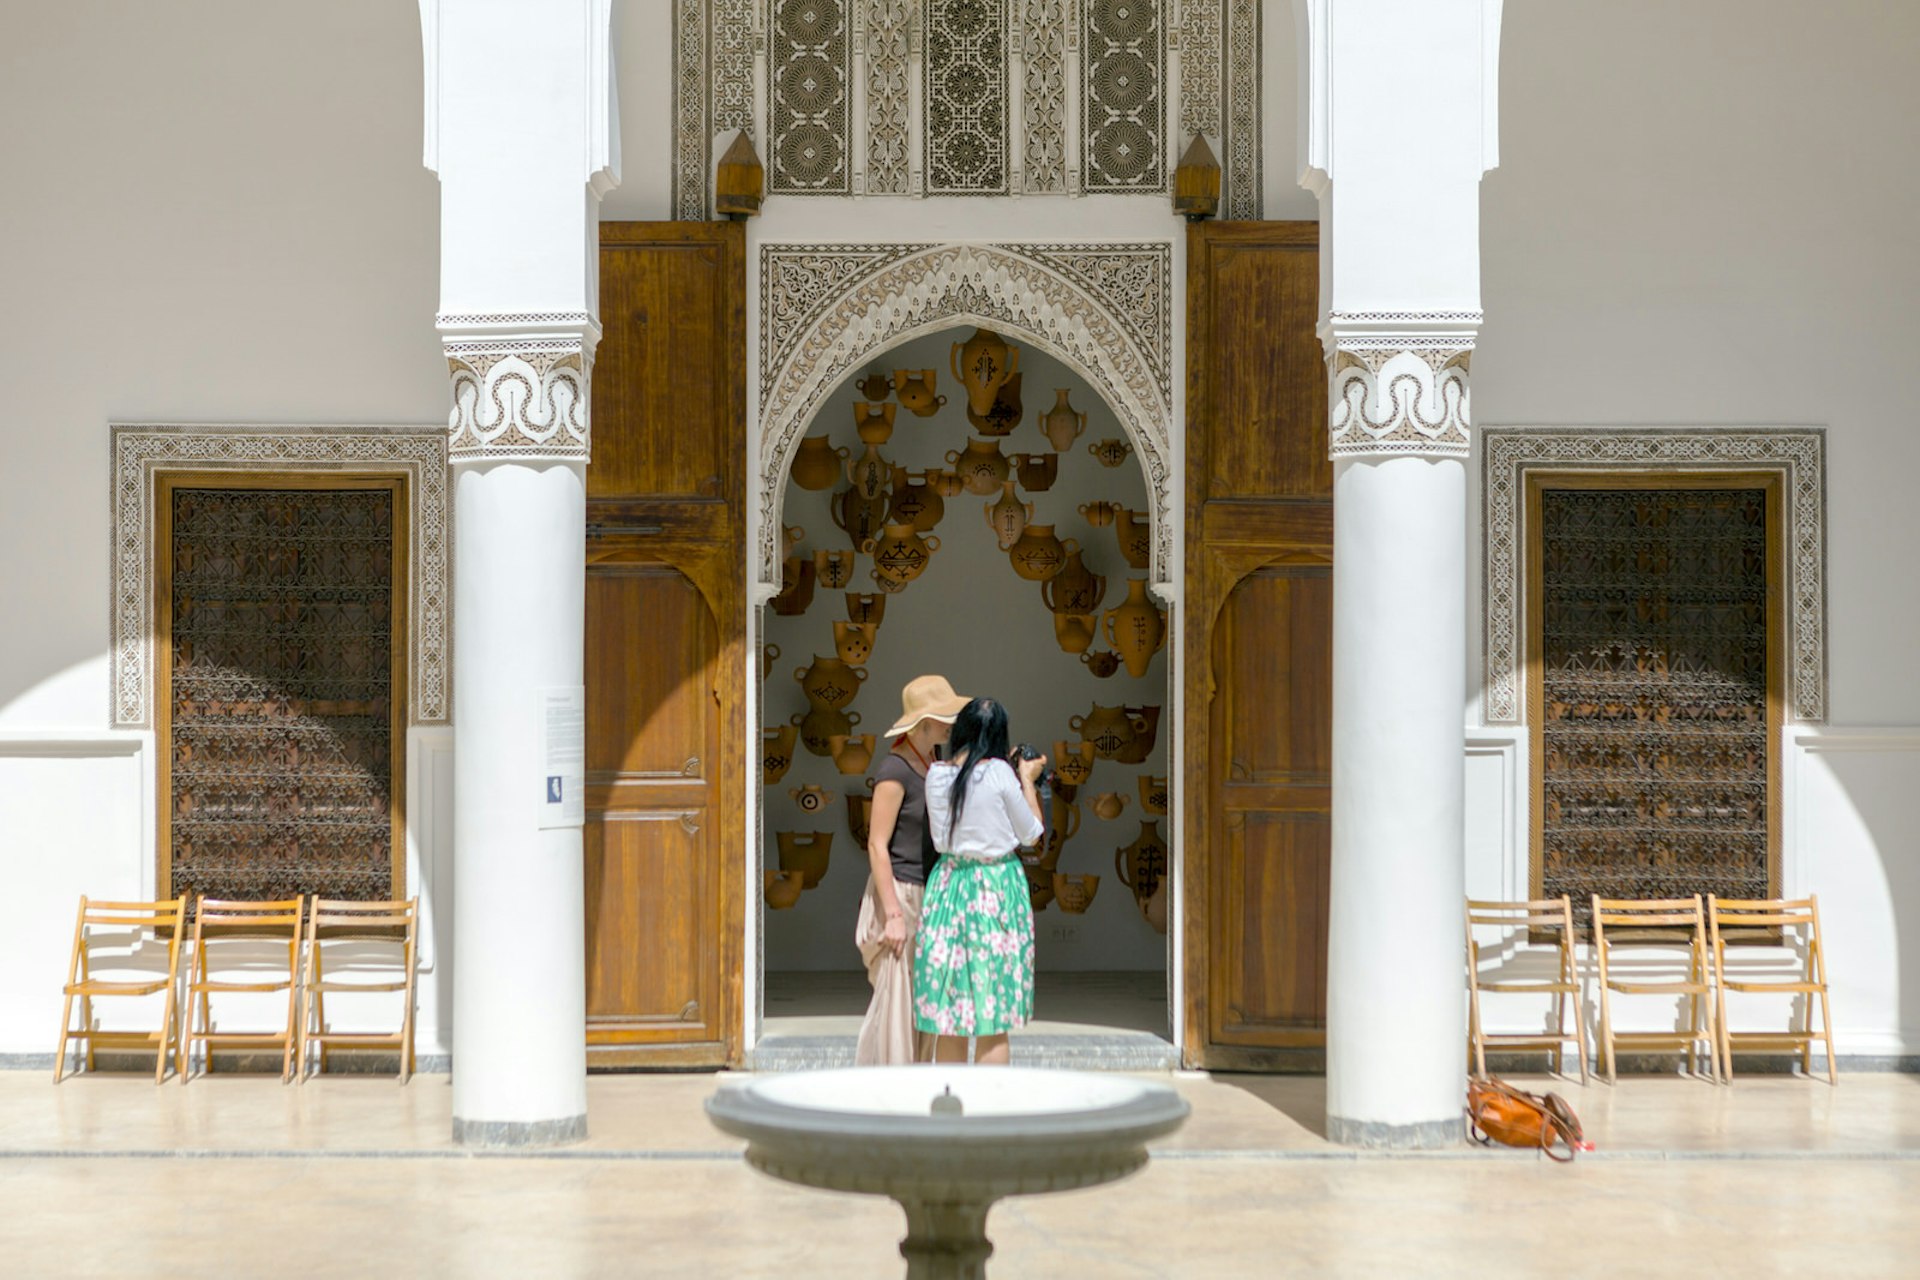 Courtyard of Dar Bellarj, Marrakesh, Morocco. A small stone fountain is in the foreground, behind it two women look at a camera, framed by the archway of a tall decorated door. Through the door it appears that clay teapots are suspended in the air. 